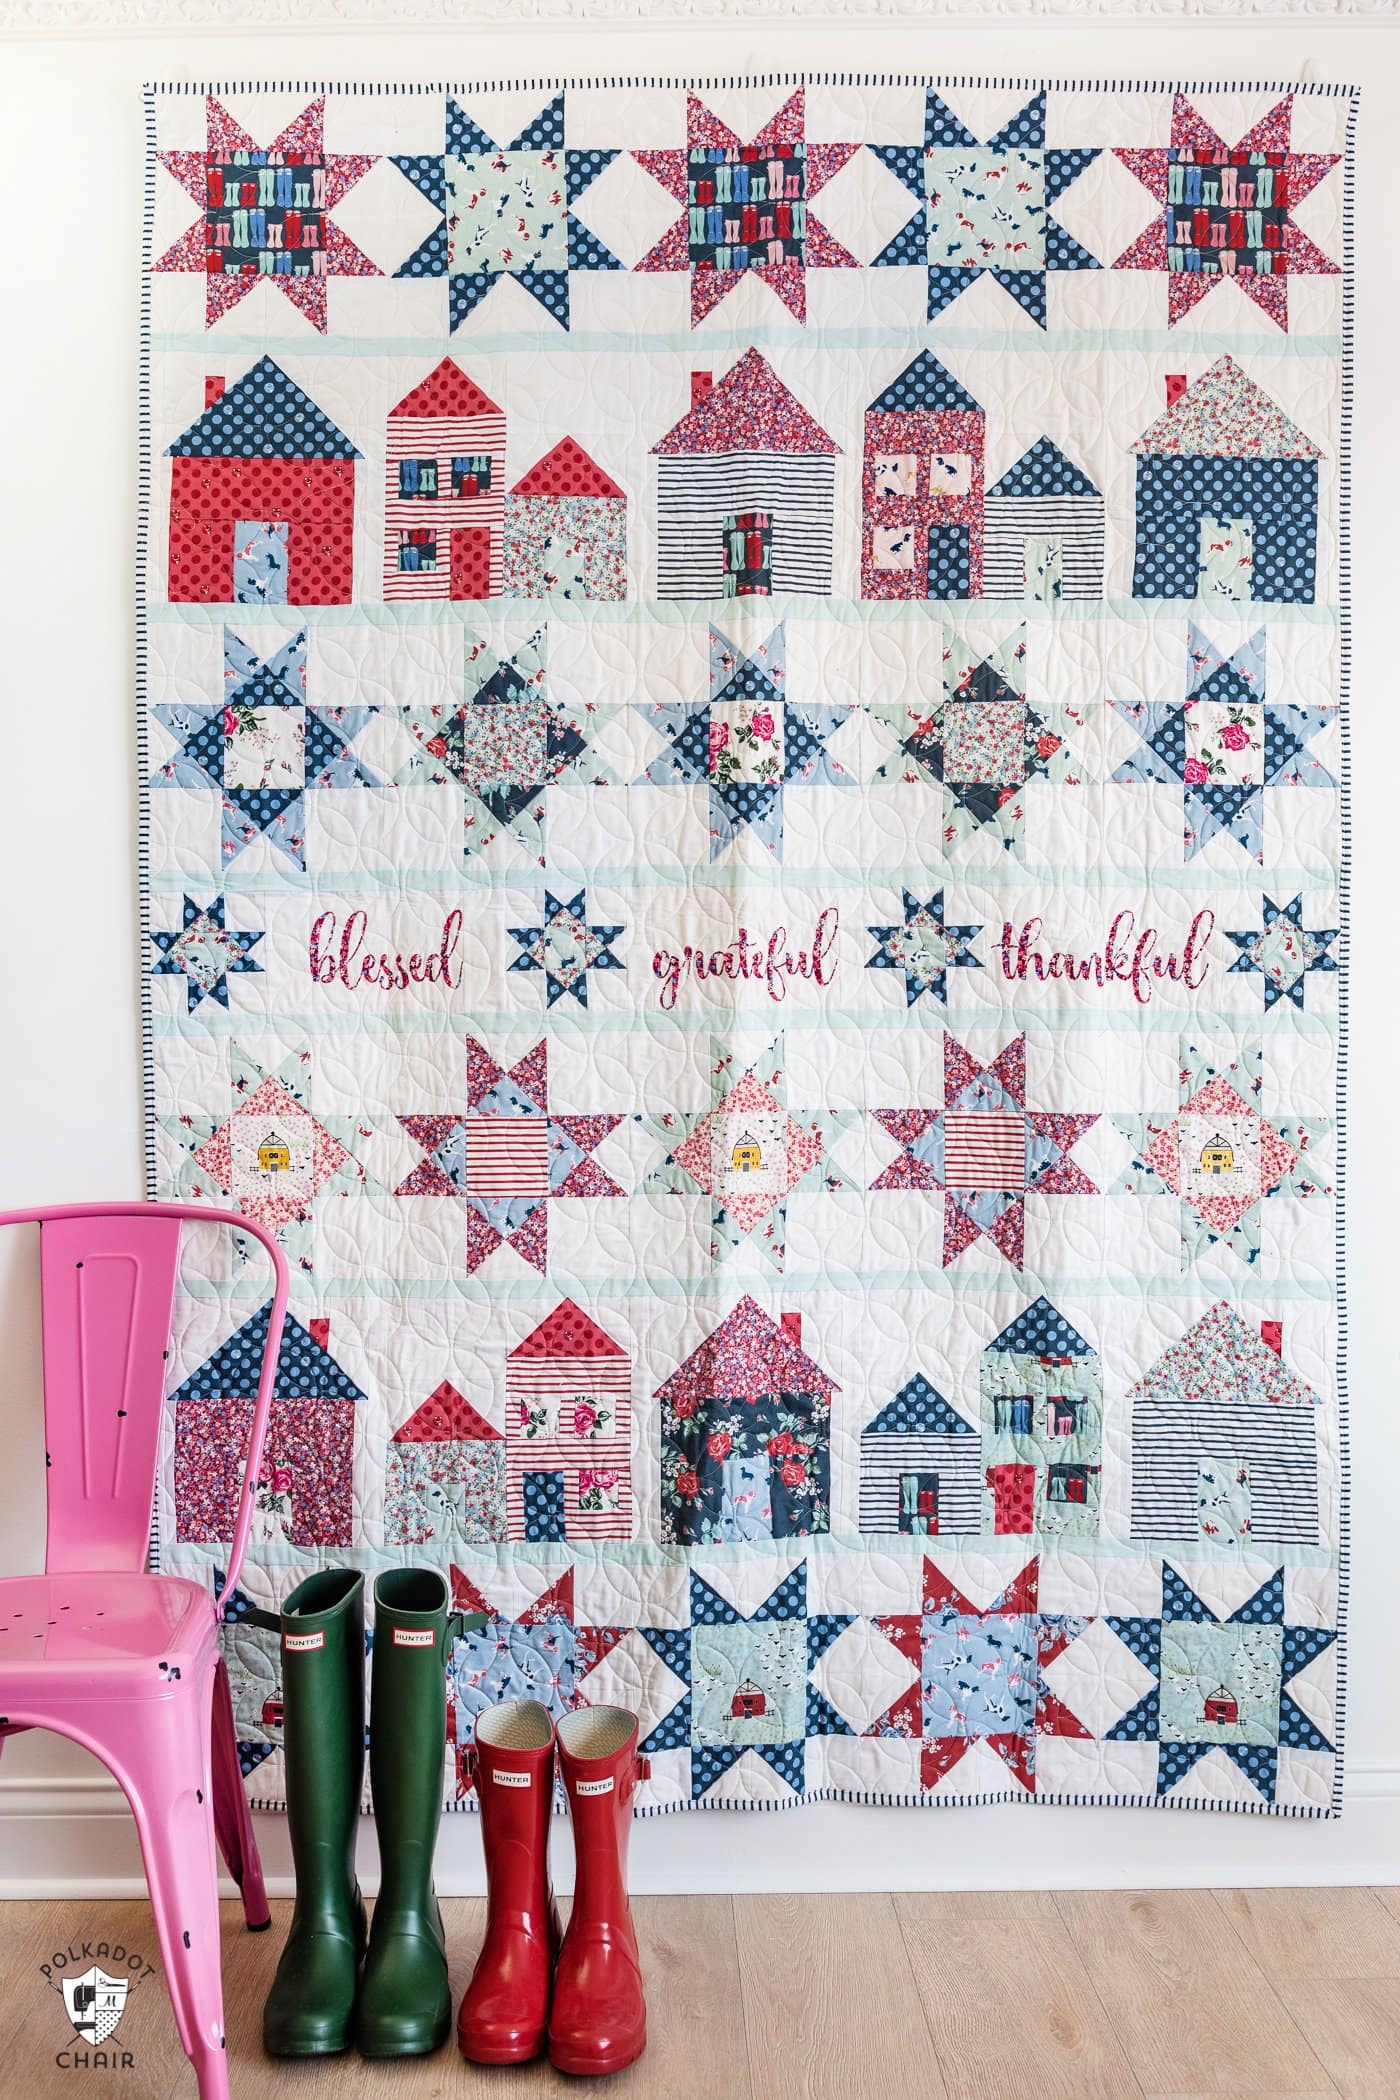 red white and blue quilt with stars and house blocks